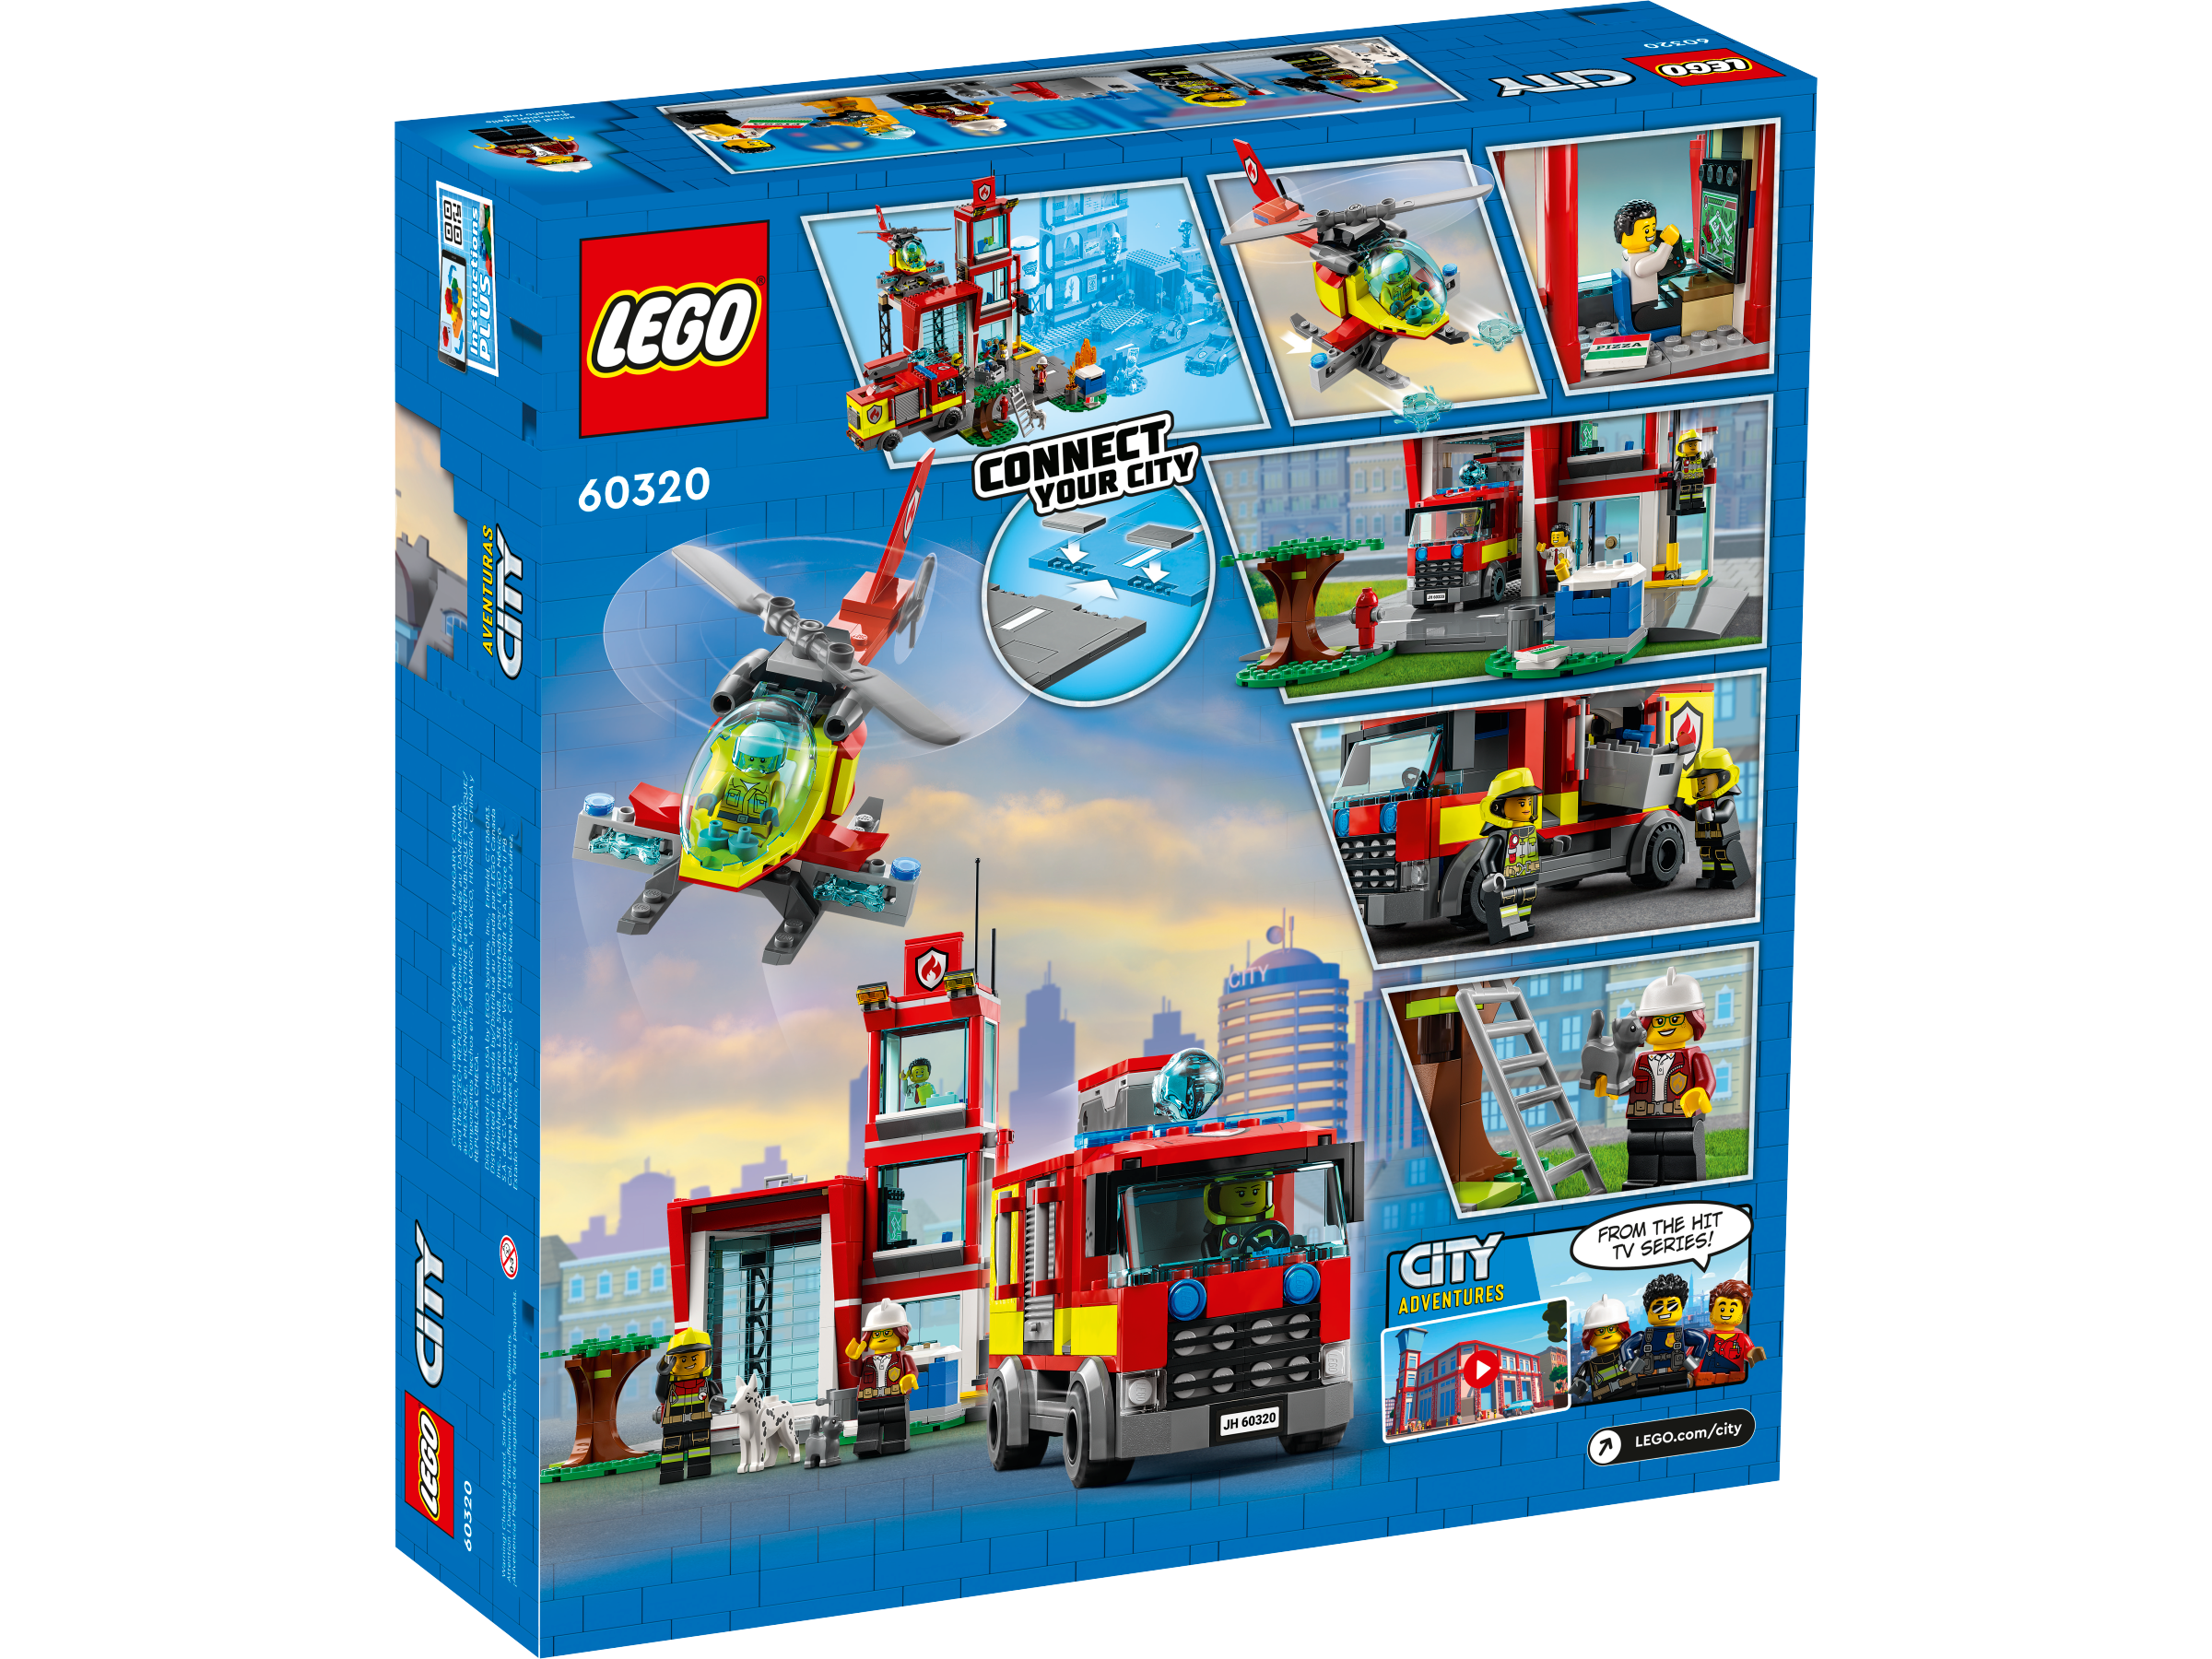 Fire Station 60320 | City | Buy online at the Official LEGO® Shop US